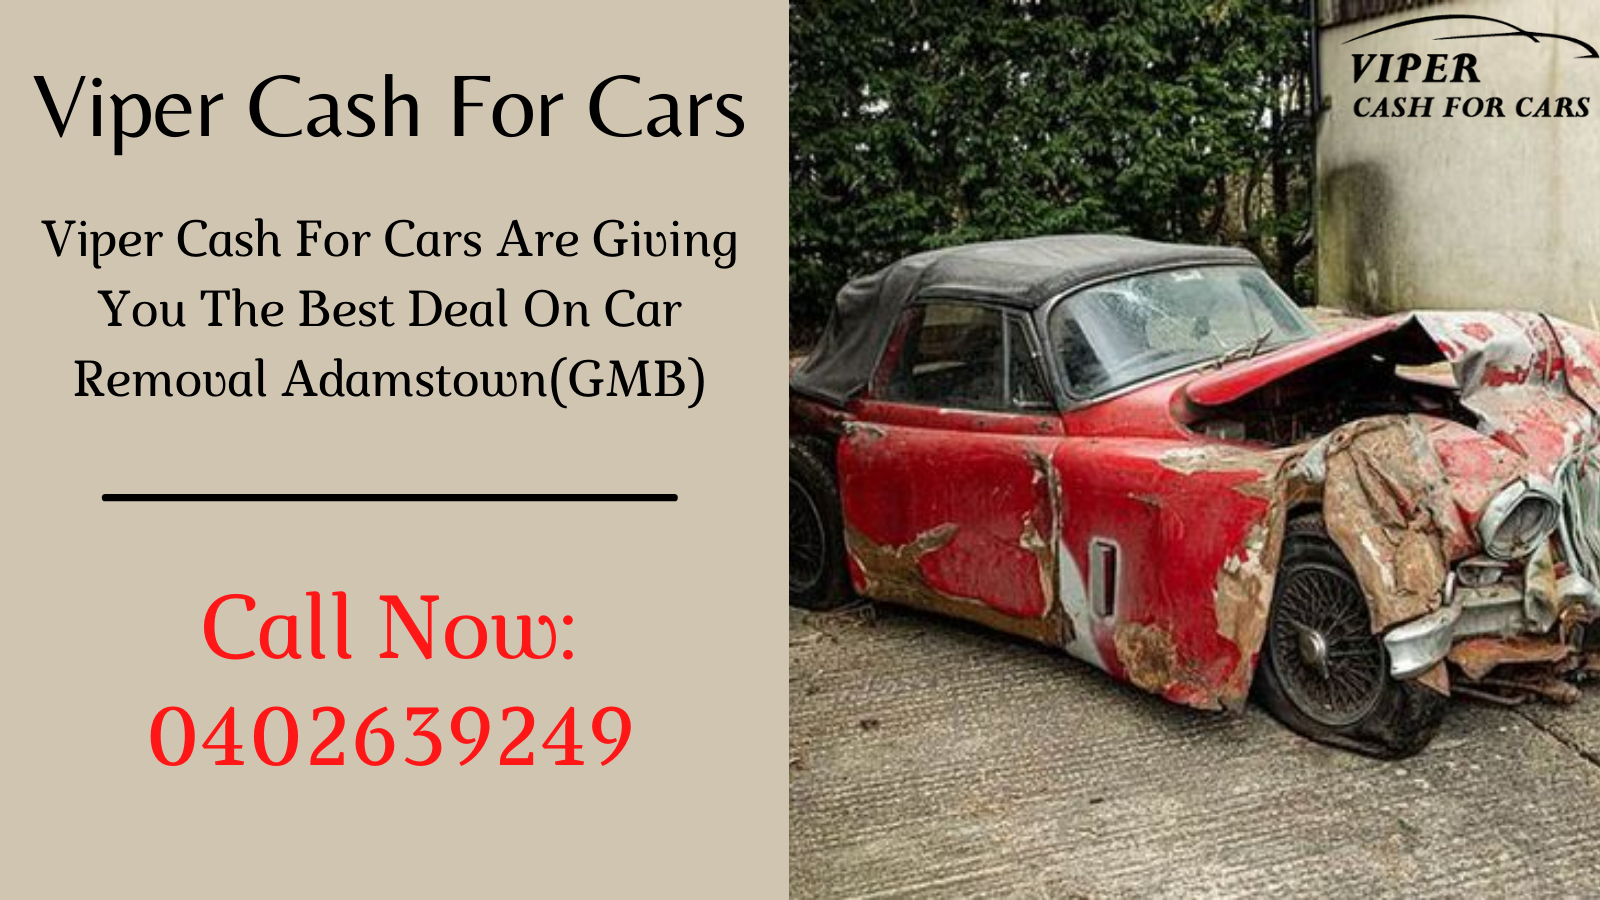 Viper Cash For Cars Are Giving You The Best Deal On Car Removal Adamstown(GMB)